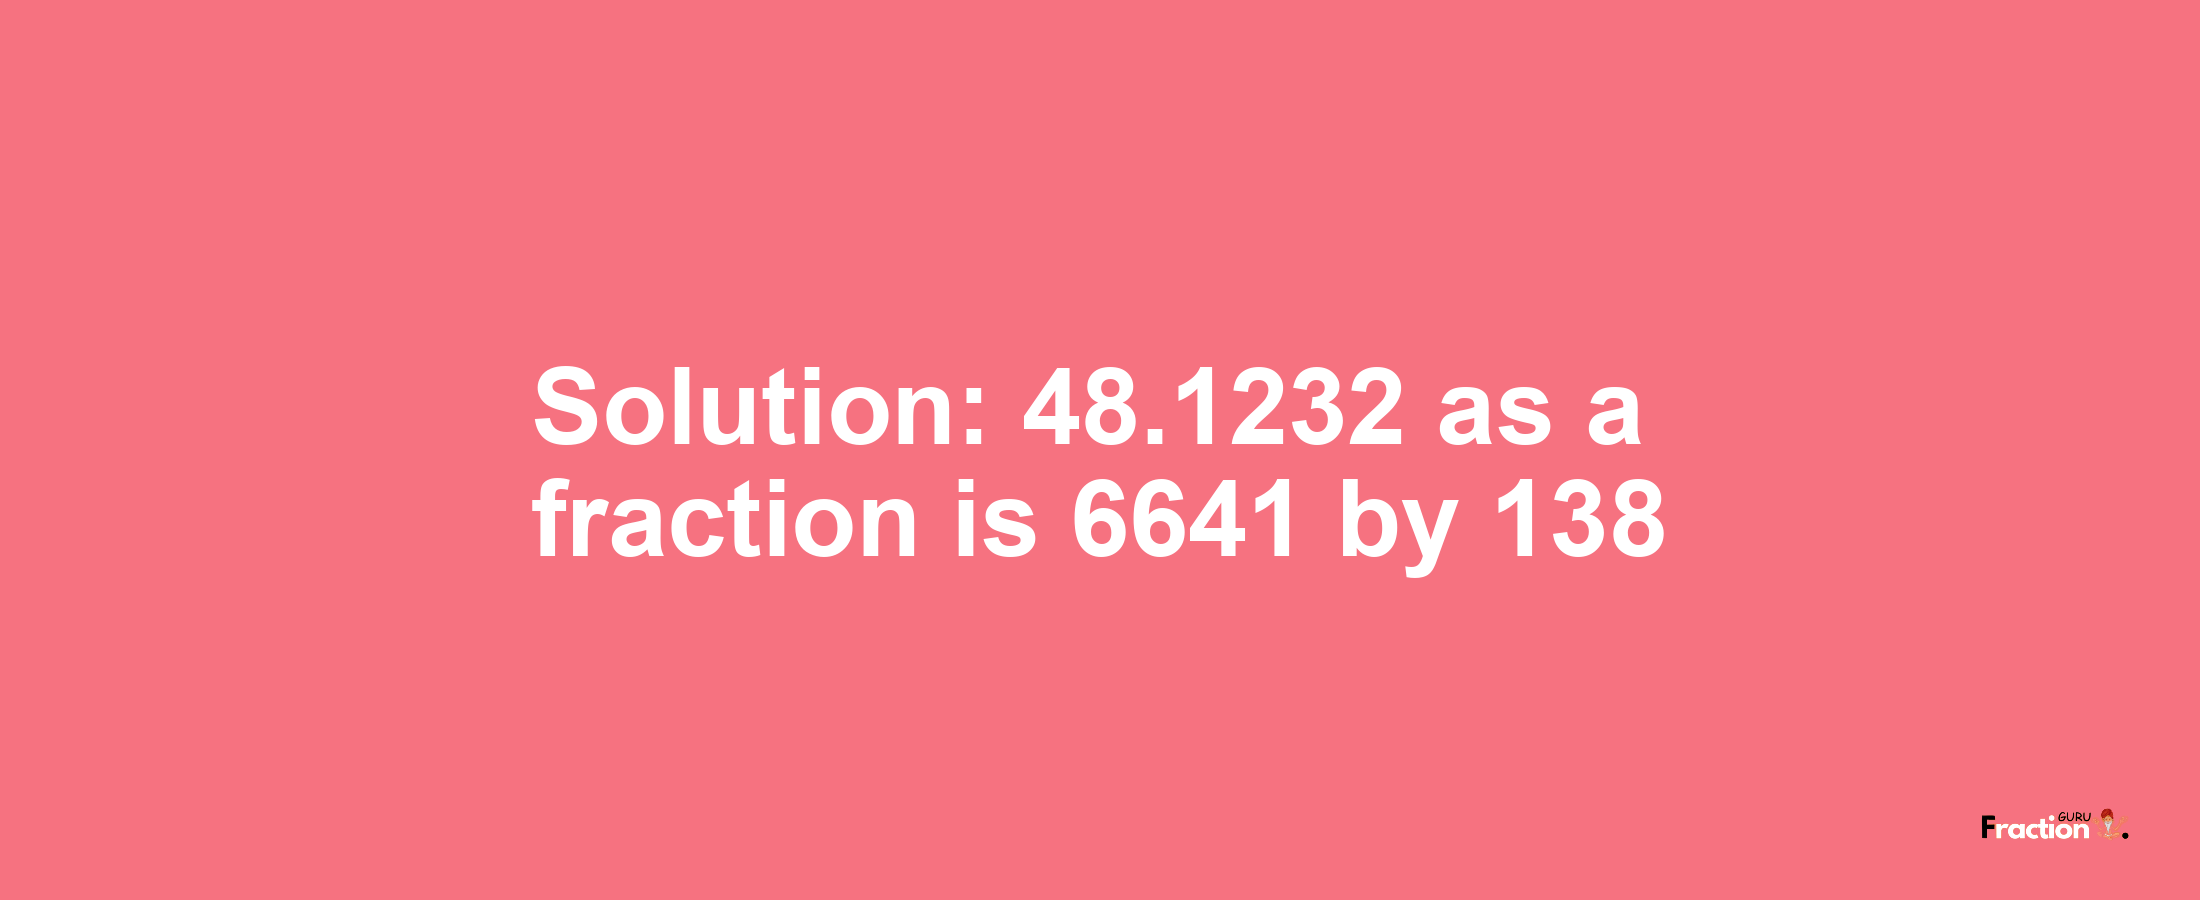 Solution:48.1232 as a fraction is 6641/138